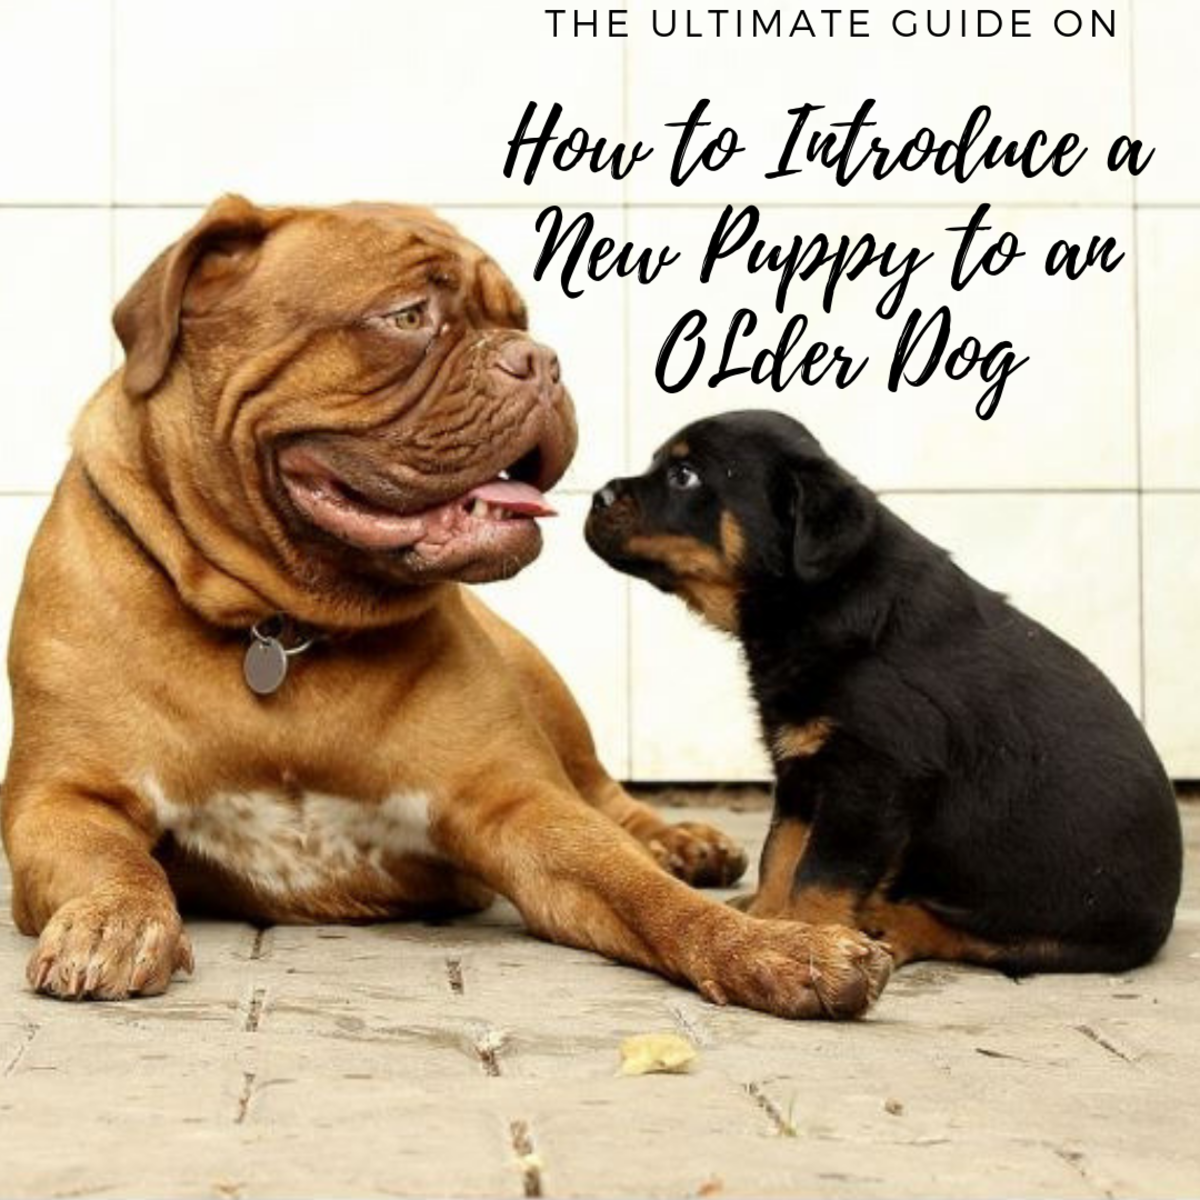 How to Introduce a New Puppy to an Older Dog: 10 Tips for Success